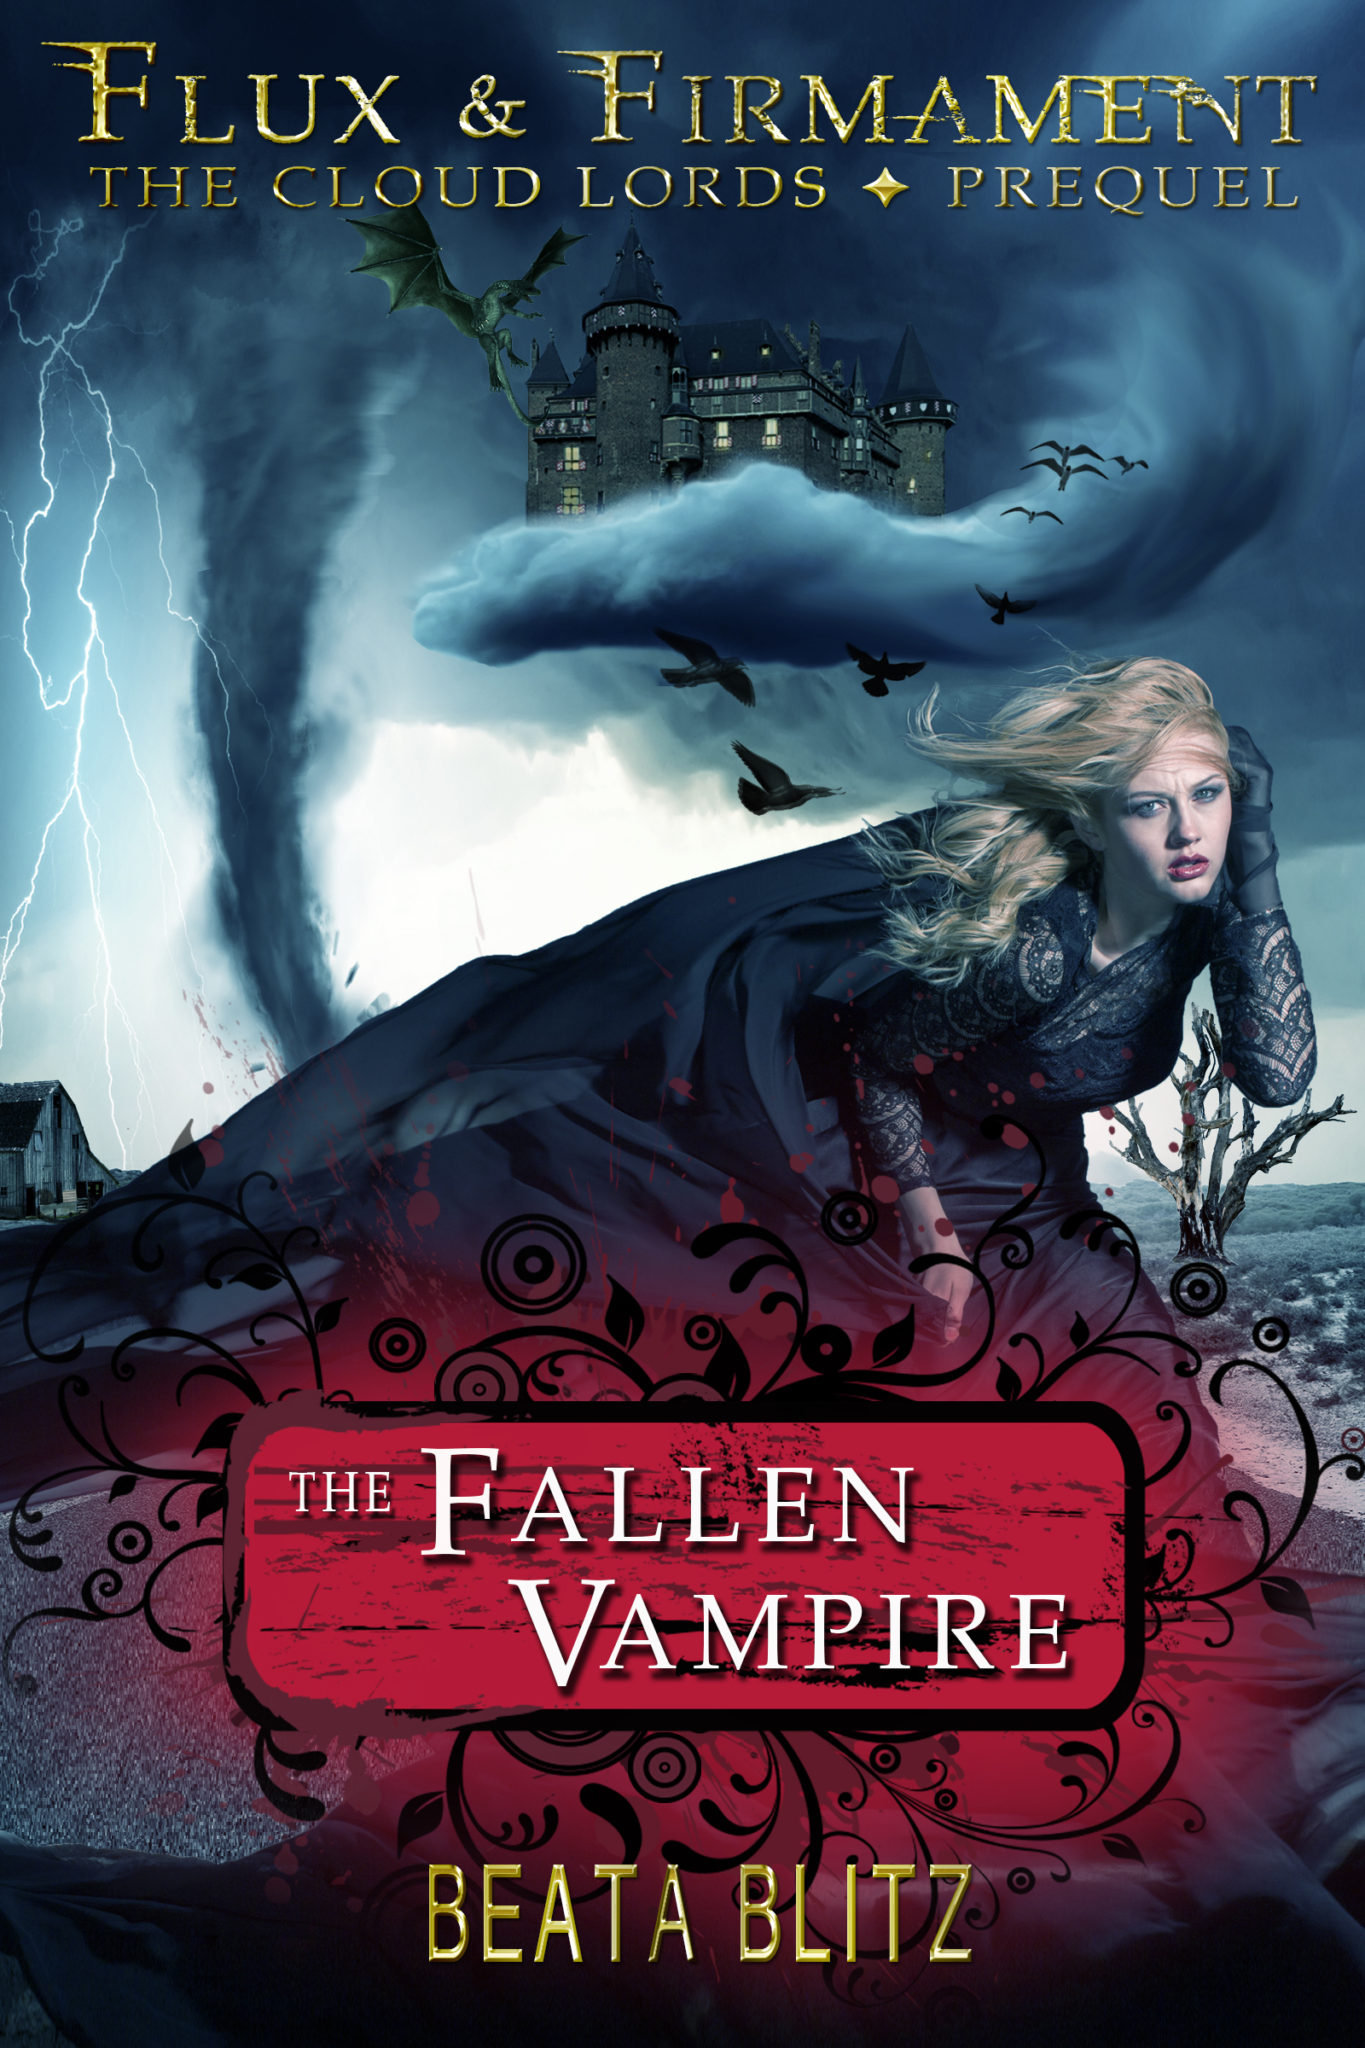 FREE: The Fallen Vampire – Prequel to Flux & Firmament : The Cloud Lords by Beata Blitz